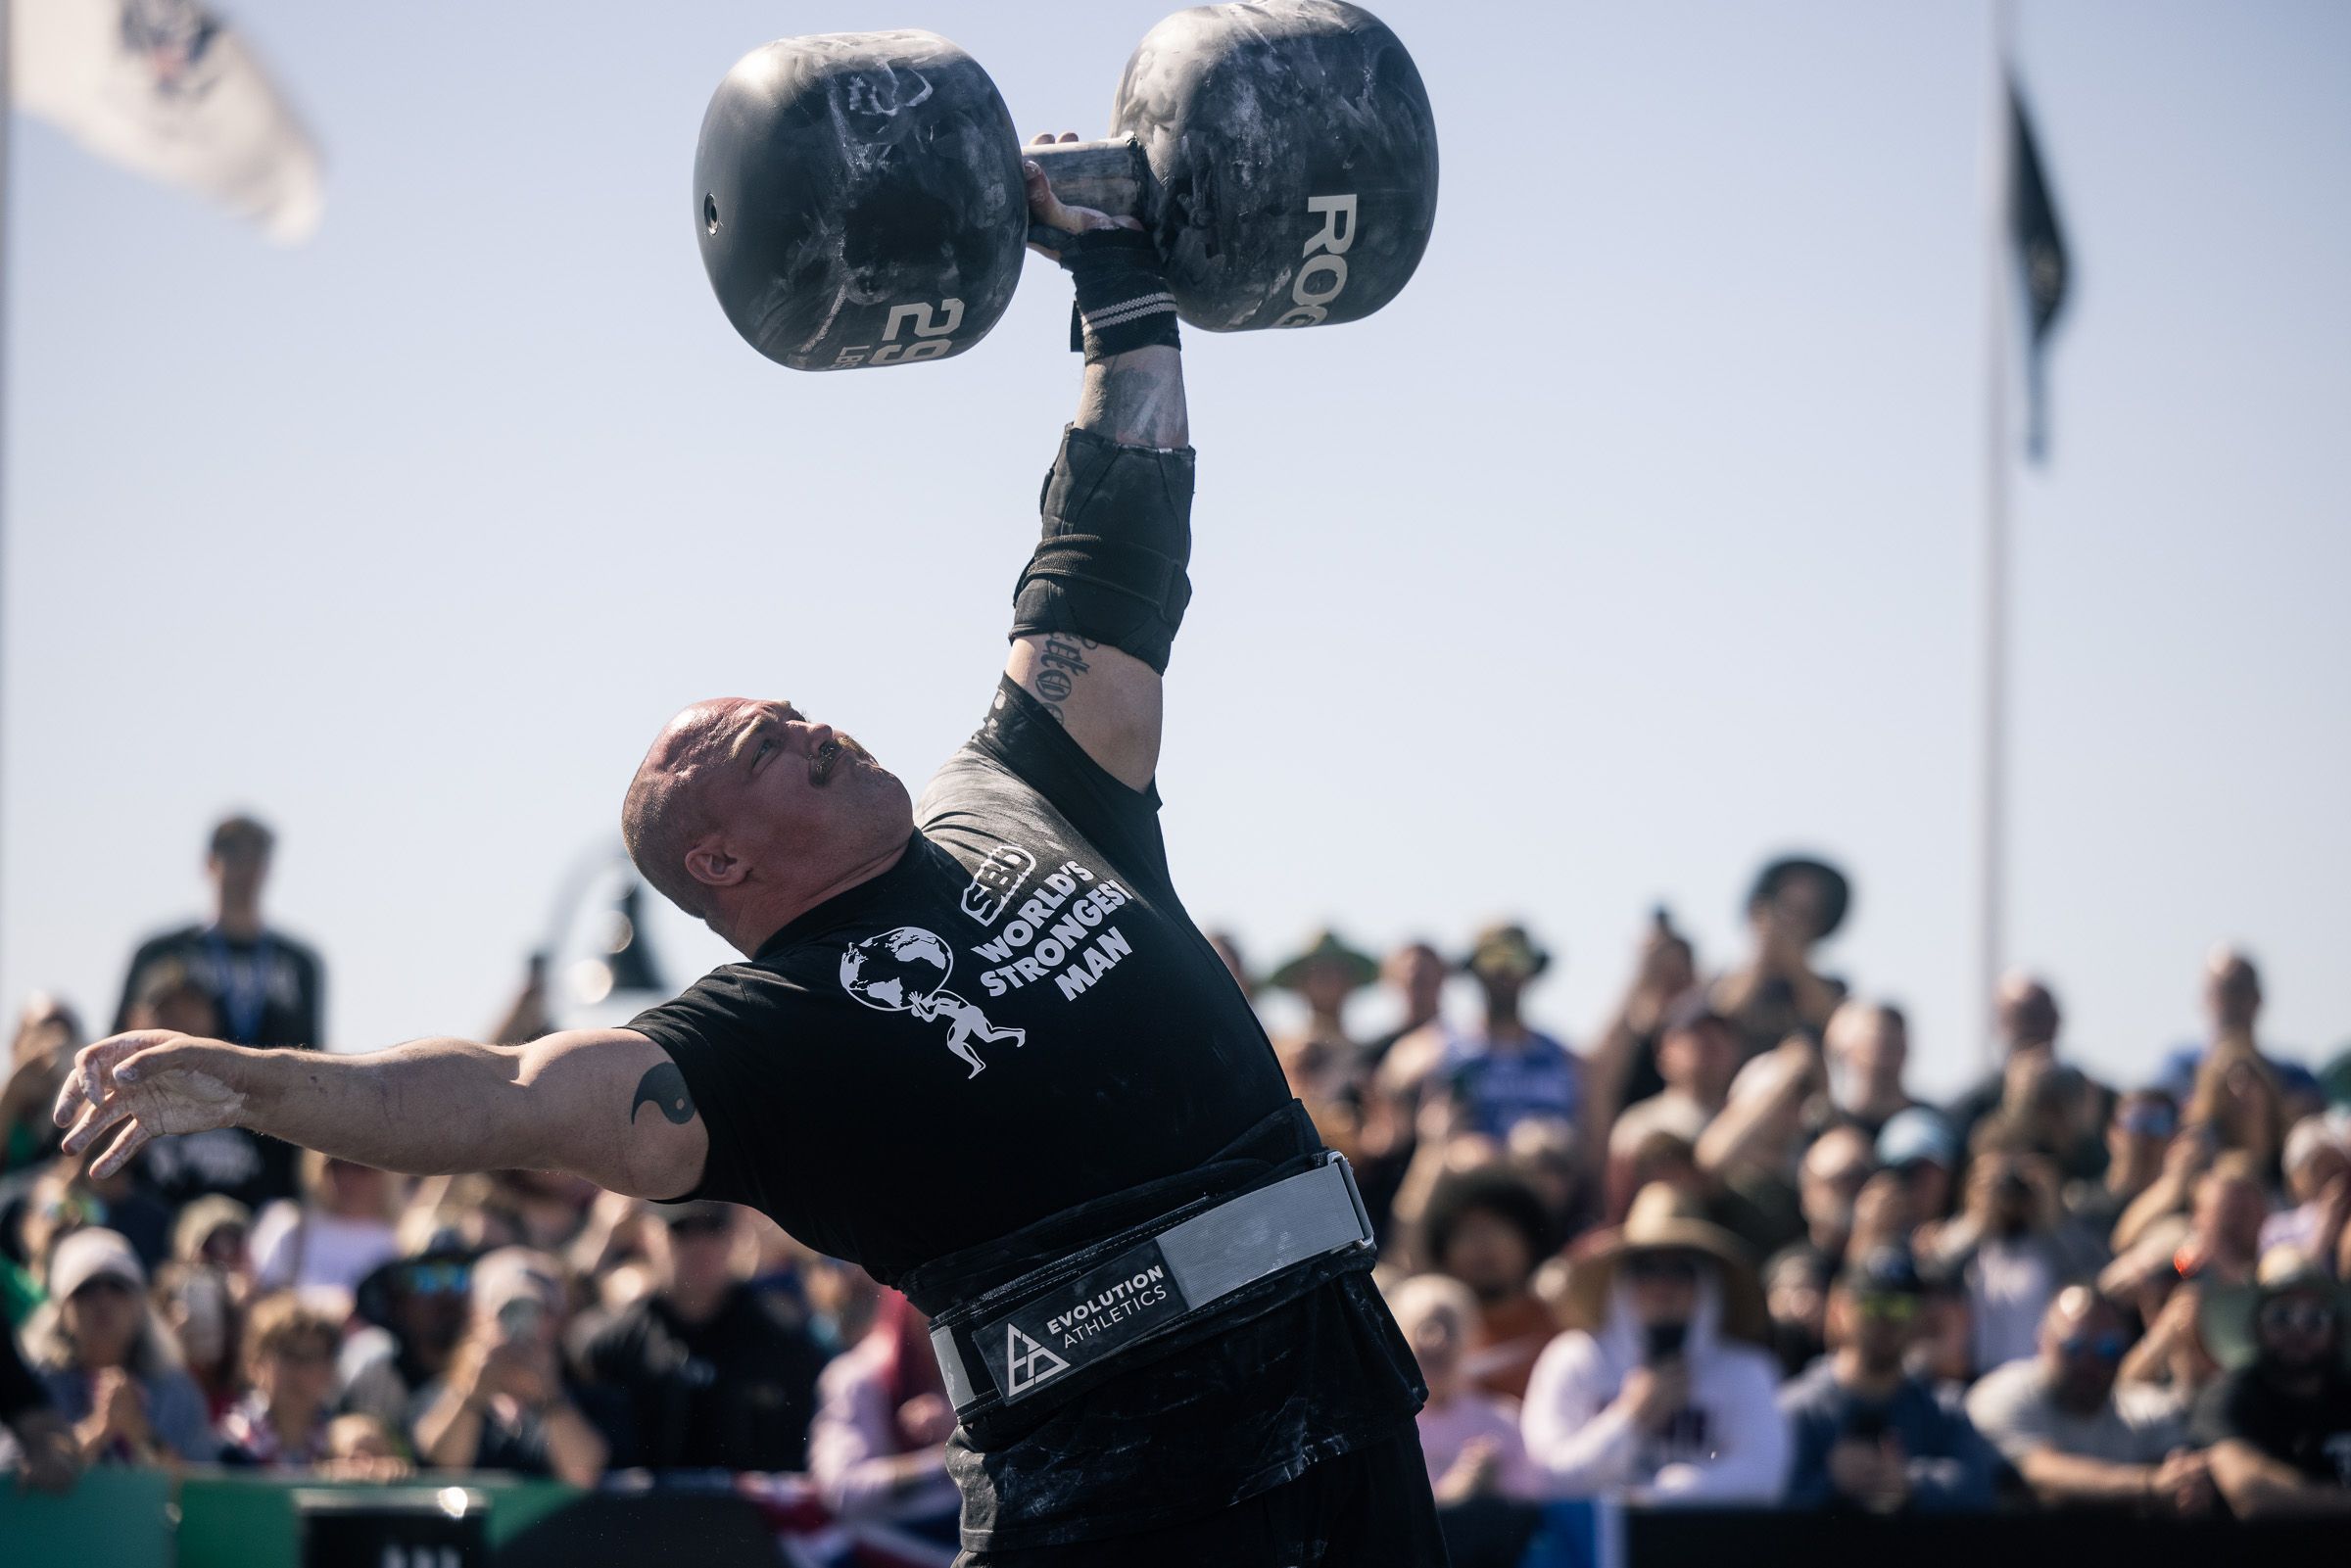 Who's the World's Strongest Man? We Rank the 10 Strongest Men of